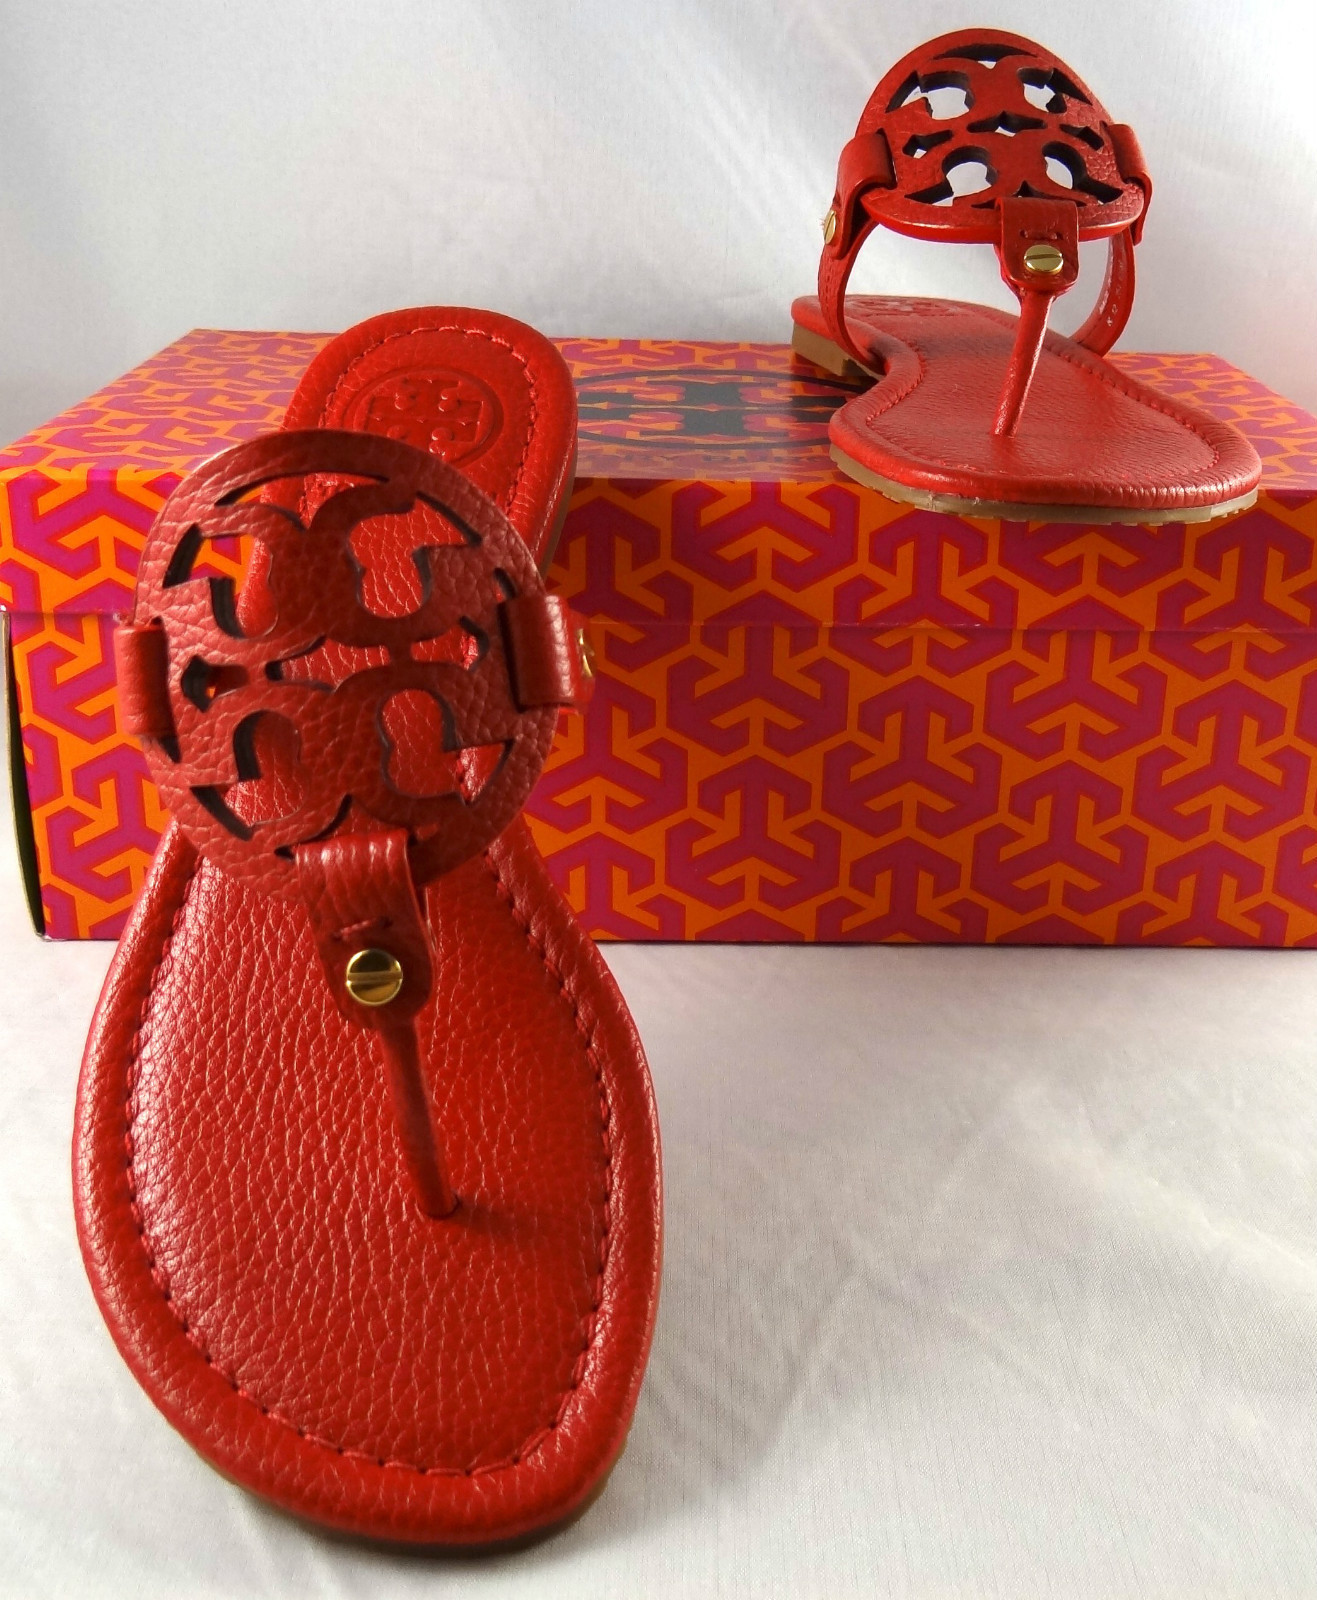 The Chic Sac: Tory Burch Leather Thong Sandals - 5 colors!